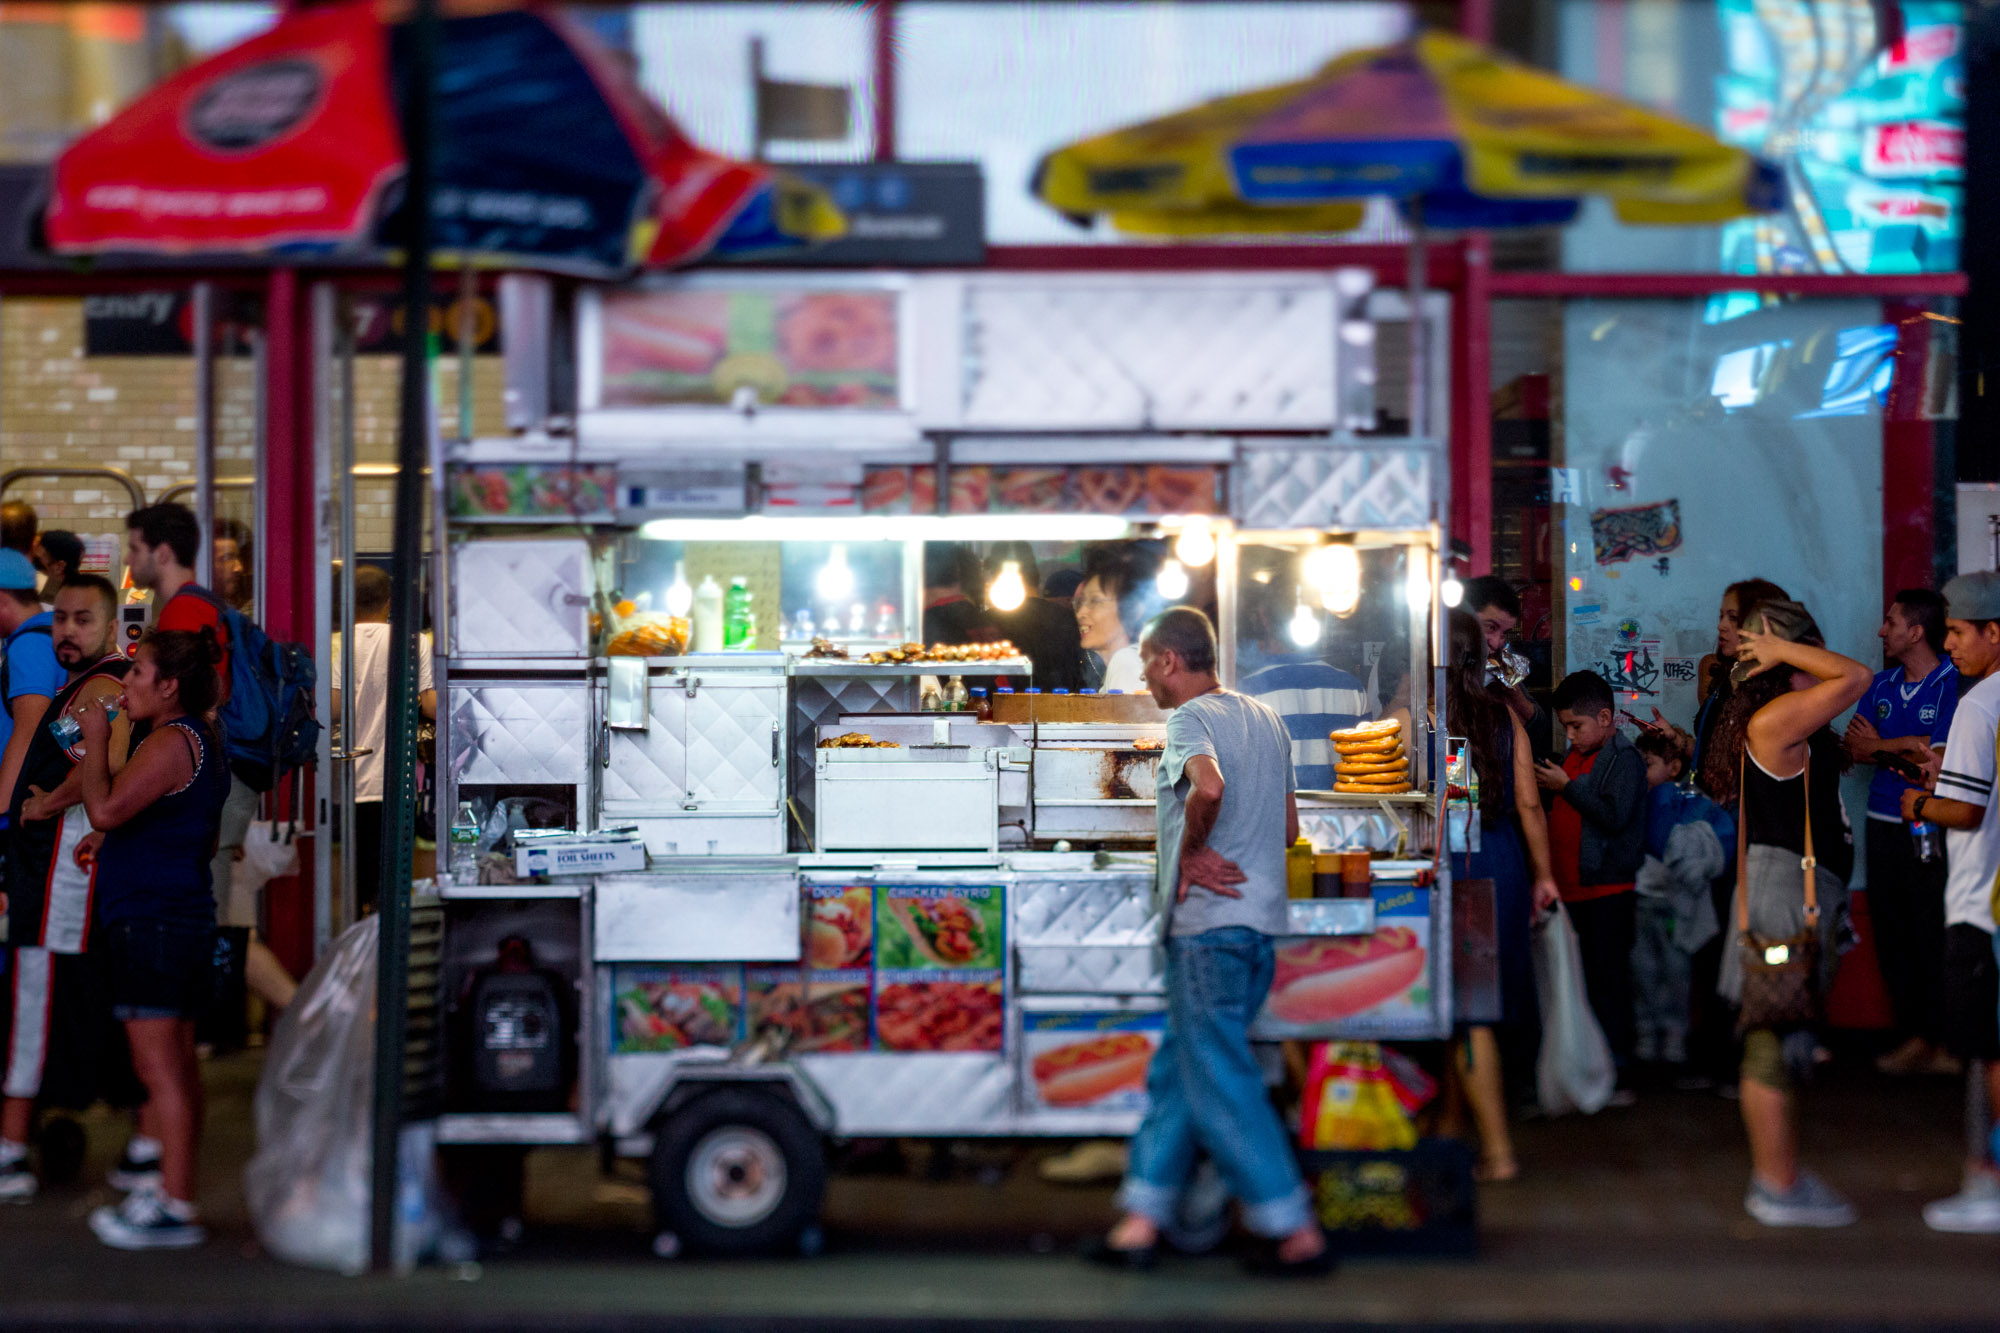 A hardworking man looks tired behind a food cart